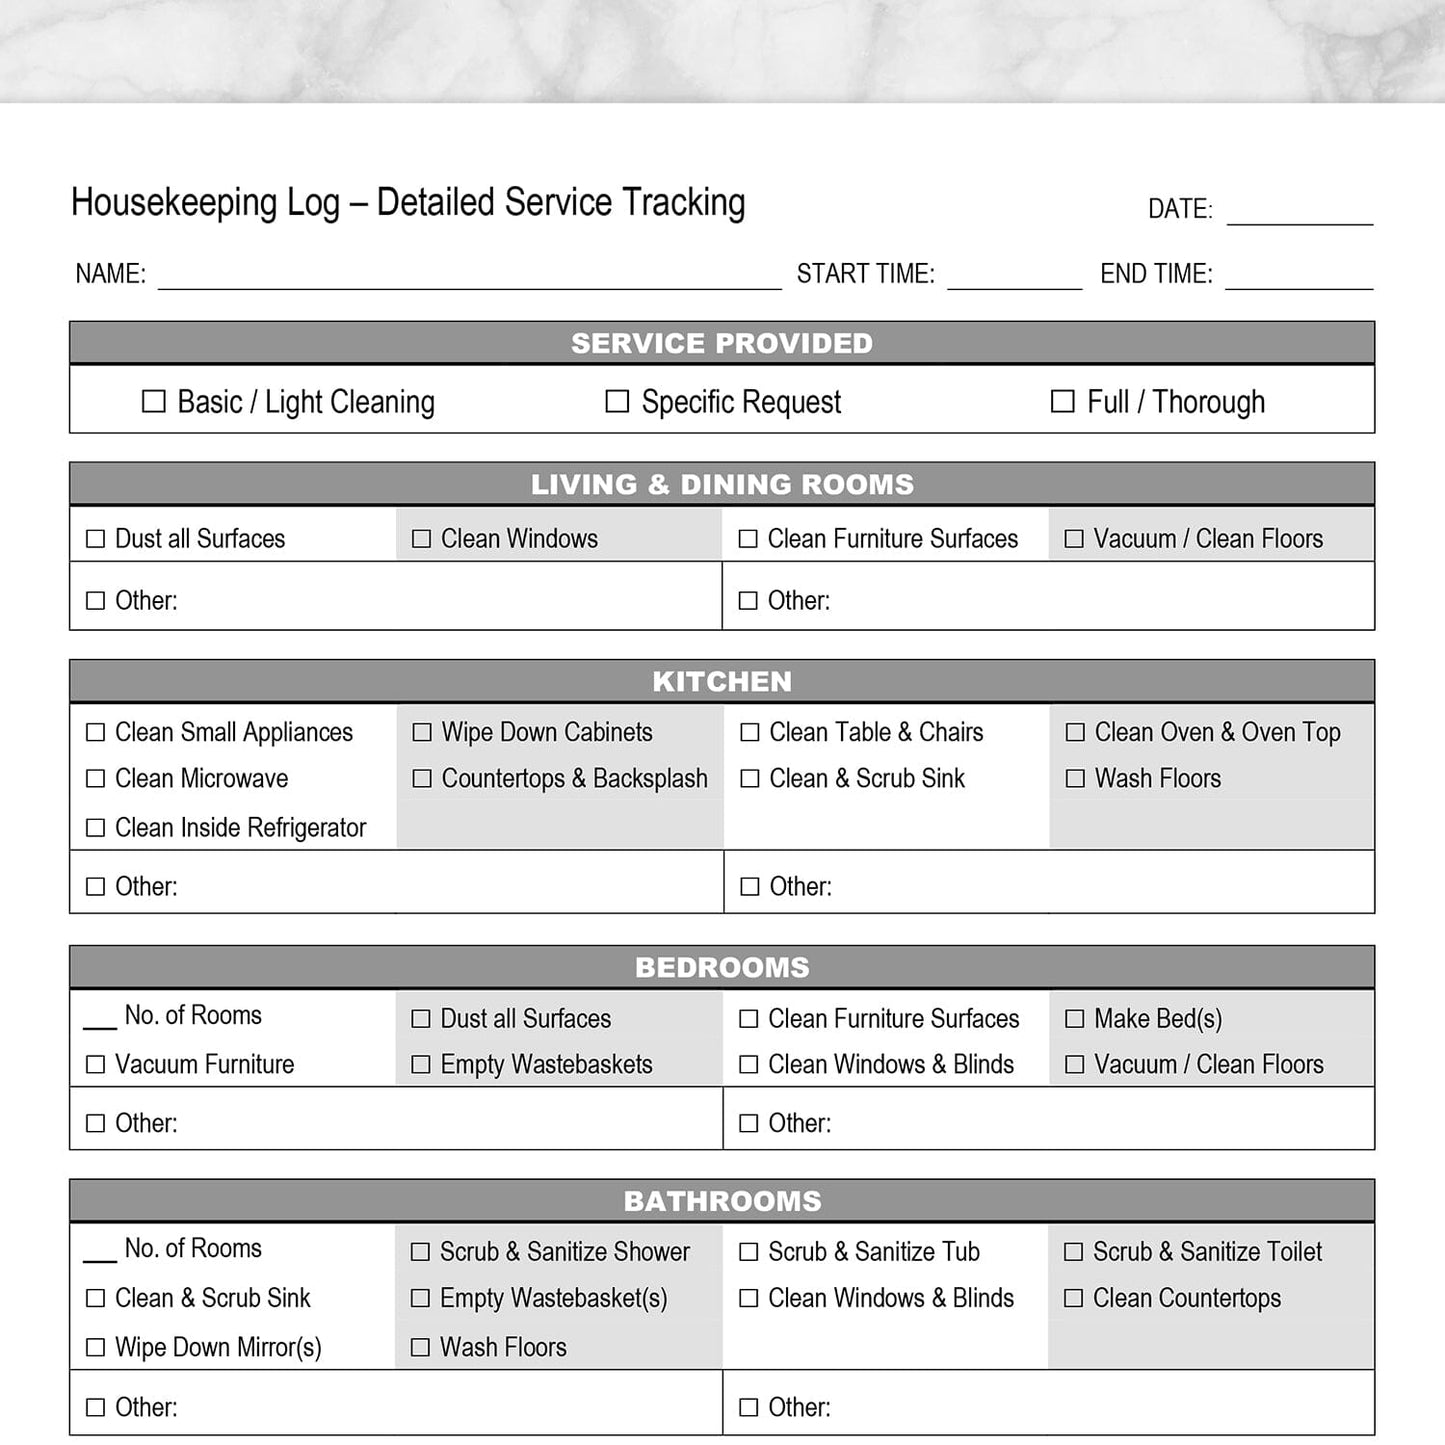 Printable Housekeeping Log - Detailed Cleaning Service Tracking at Printable Planning. Image shows a closeup of the top half of the page.